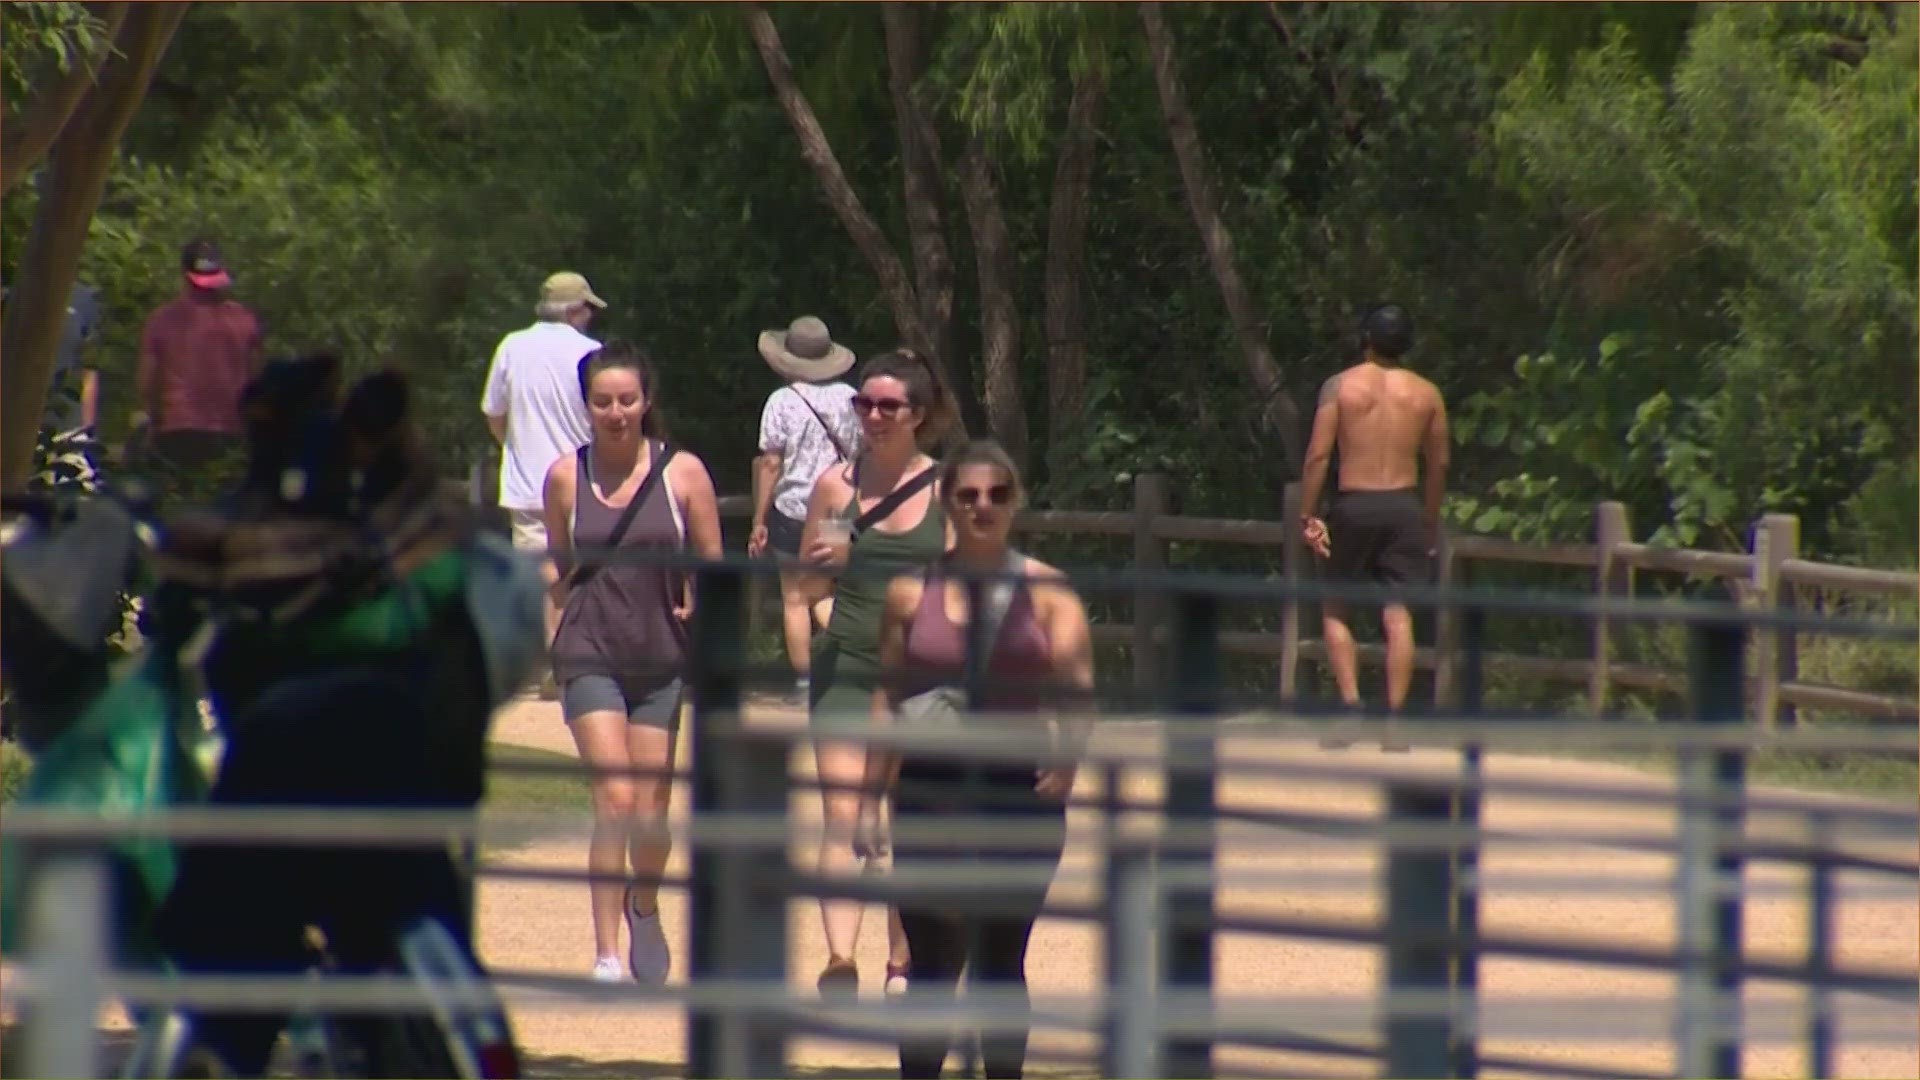 Austin's Emergency Management Office has issued some tips for how to stay safe outside during the hot summer months. KVUE's Eric Pointer has more.